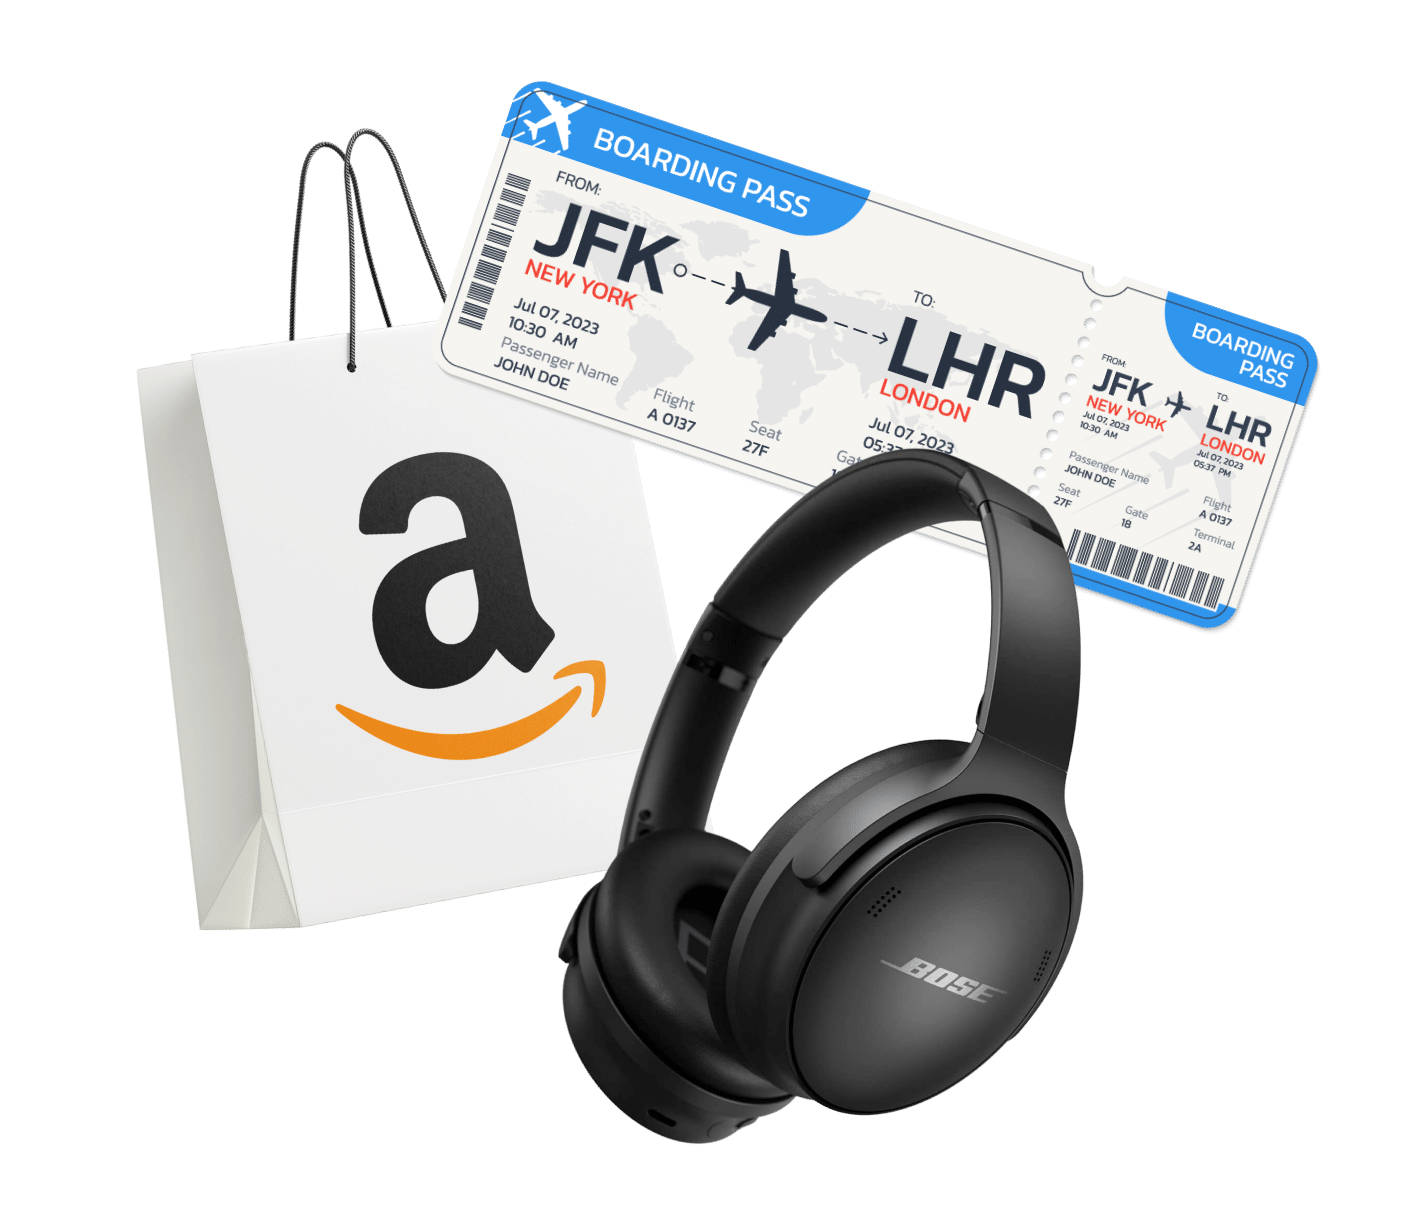 Amazon bag, boarding pass for a flight to London, and Bose headphones.